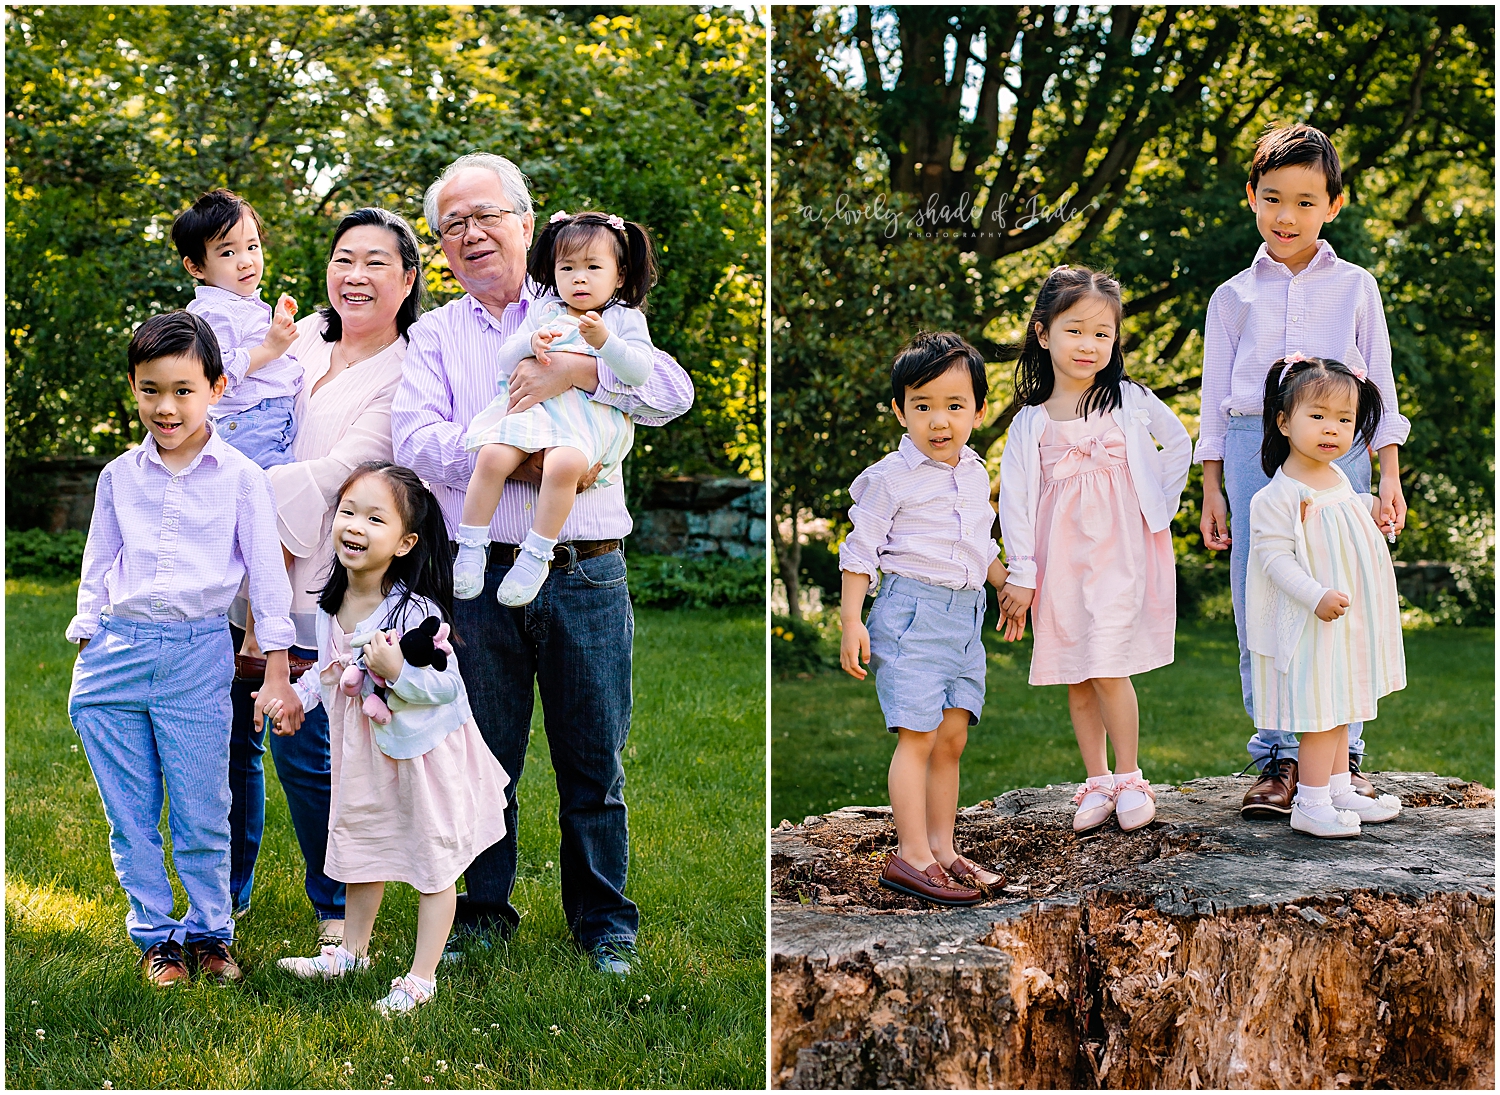 Fun_Extended_Family_Session_Morristown_NJ_Photography_0012.jpg